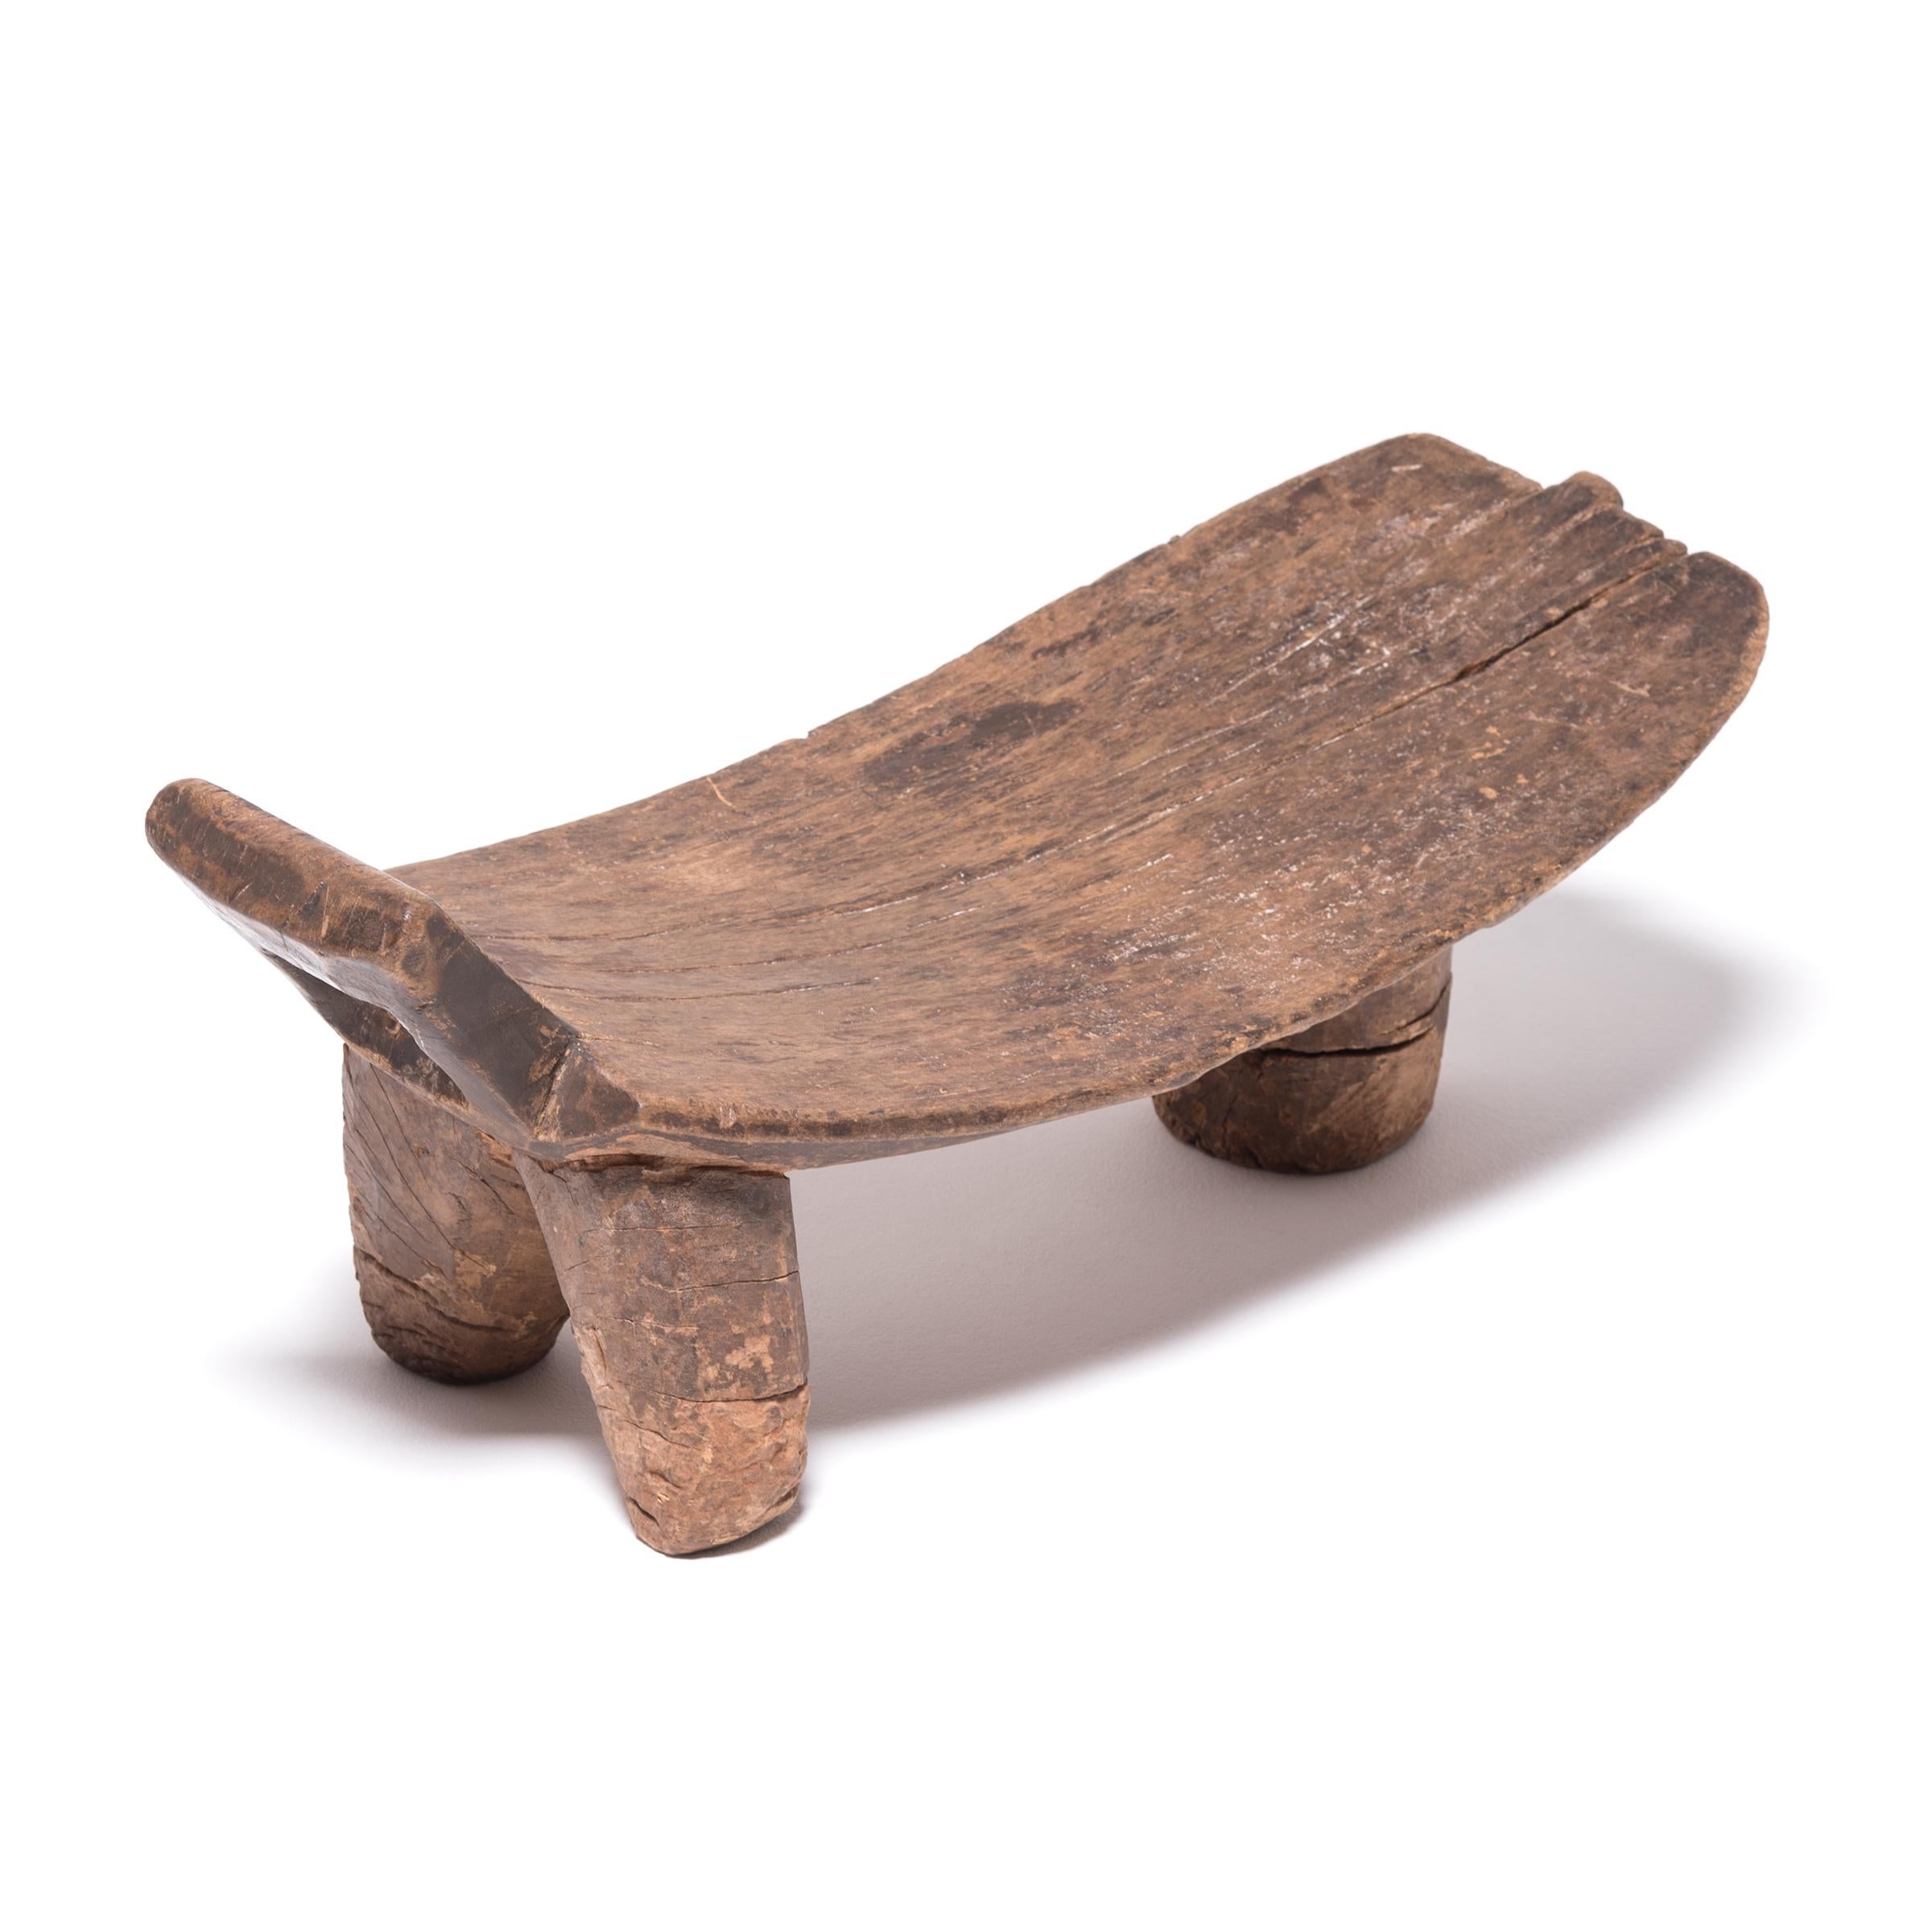 Ivorian Senufo Arched Baby Bed Stool, c. 1900